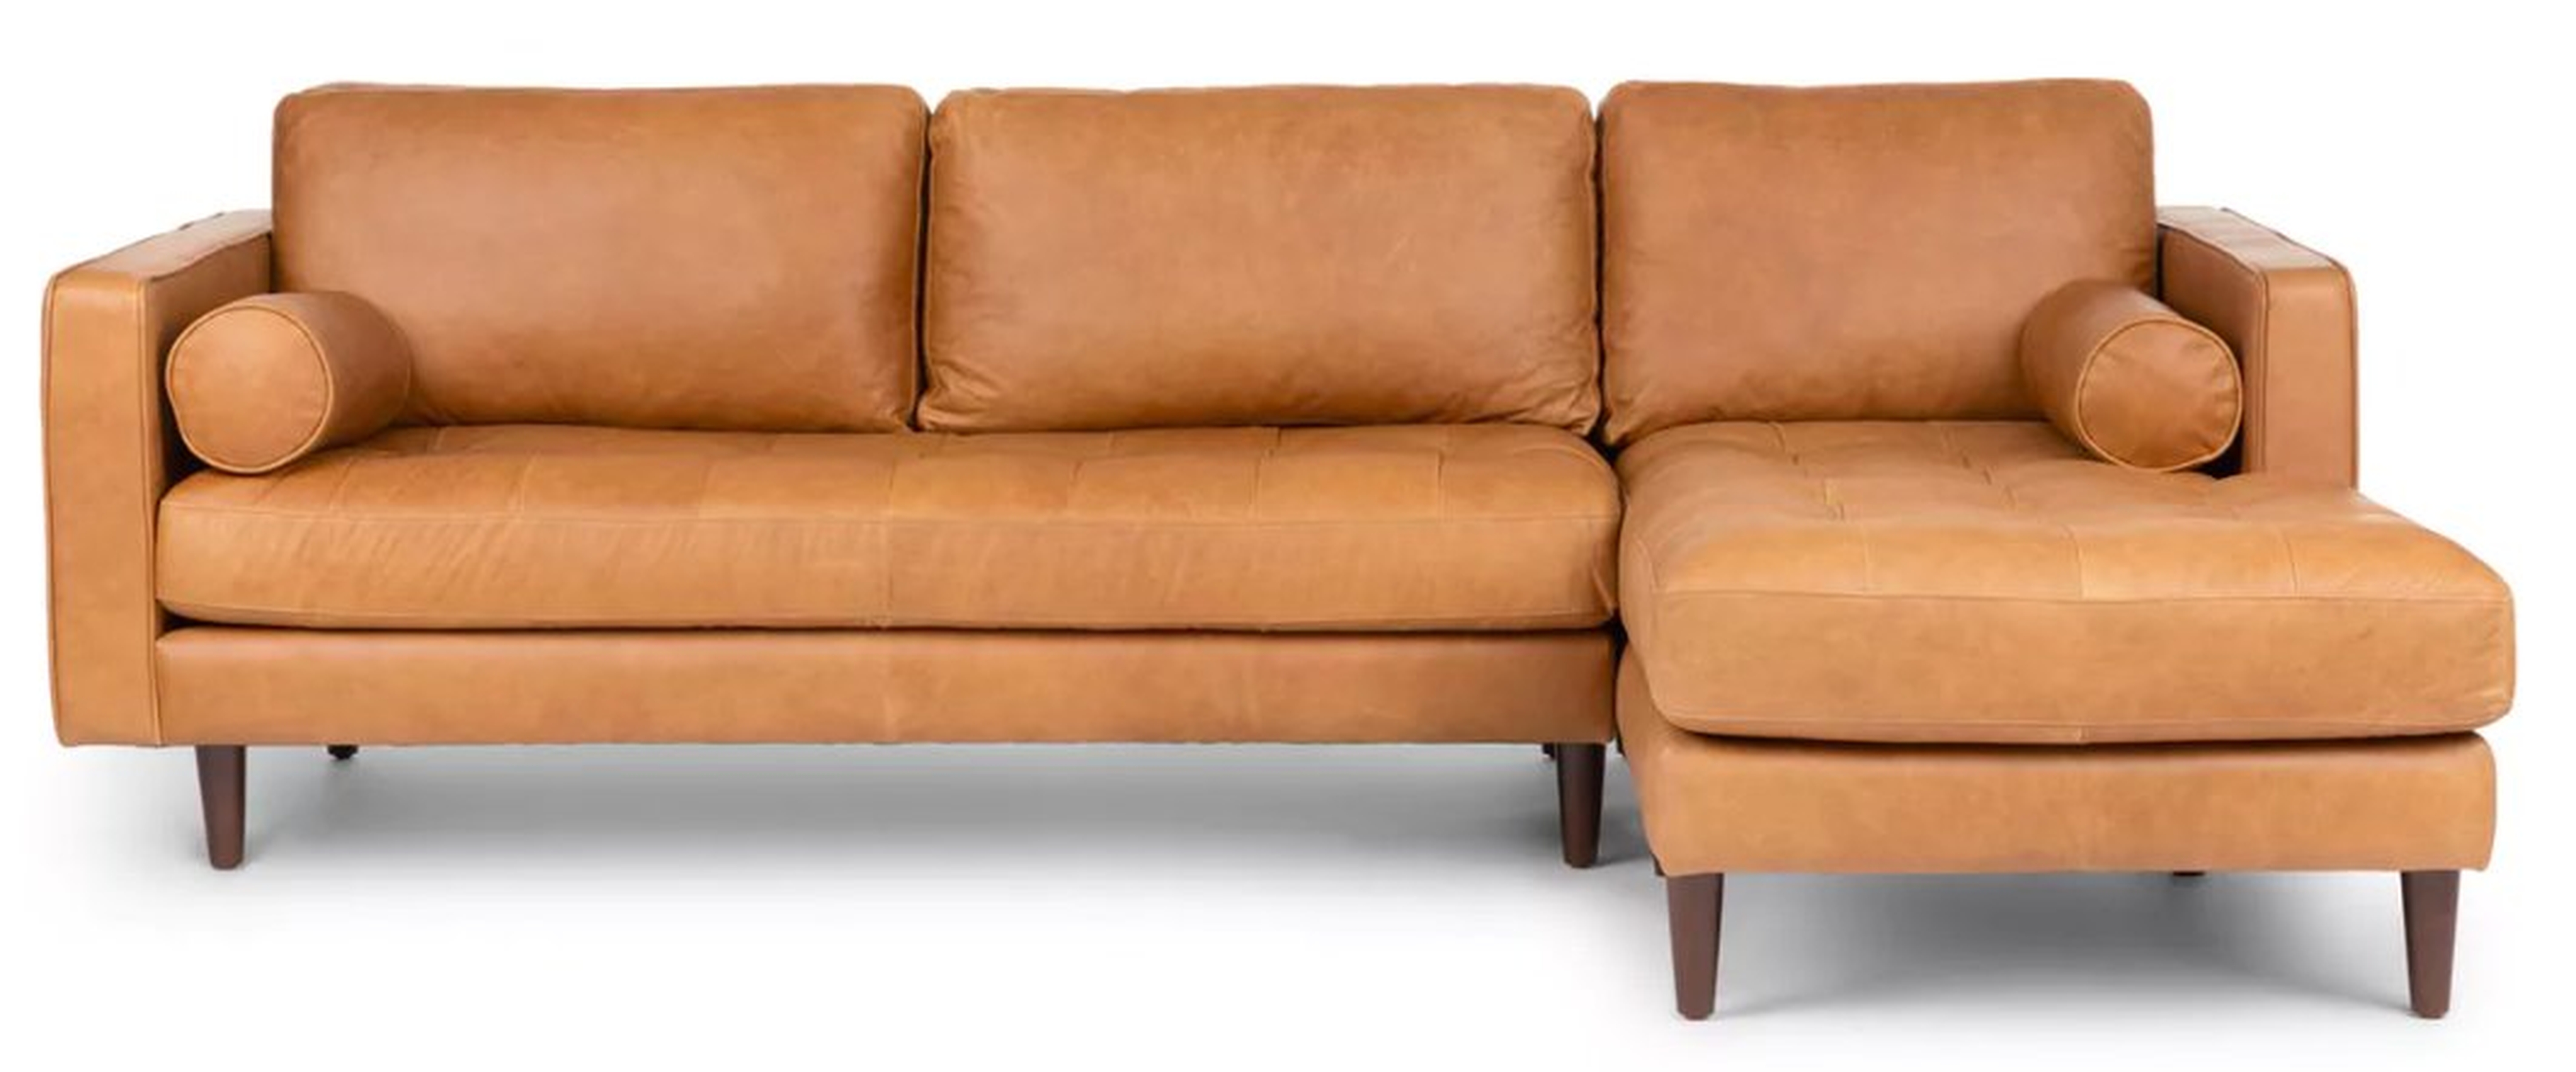 Sven sectional - Right chaise - Article